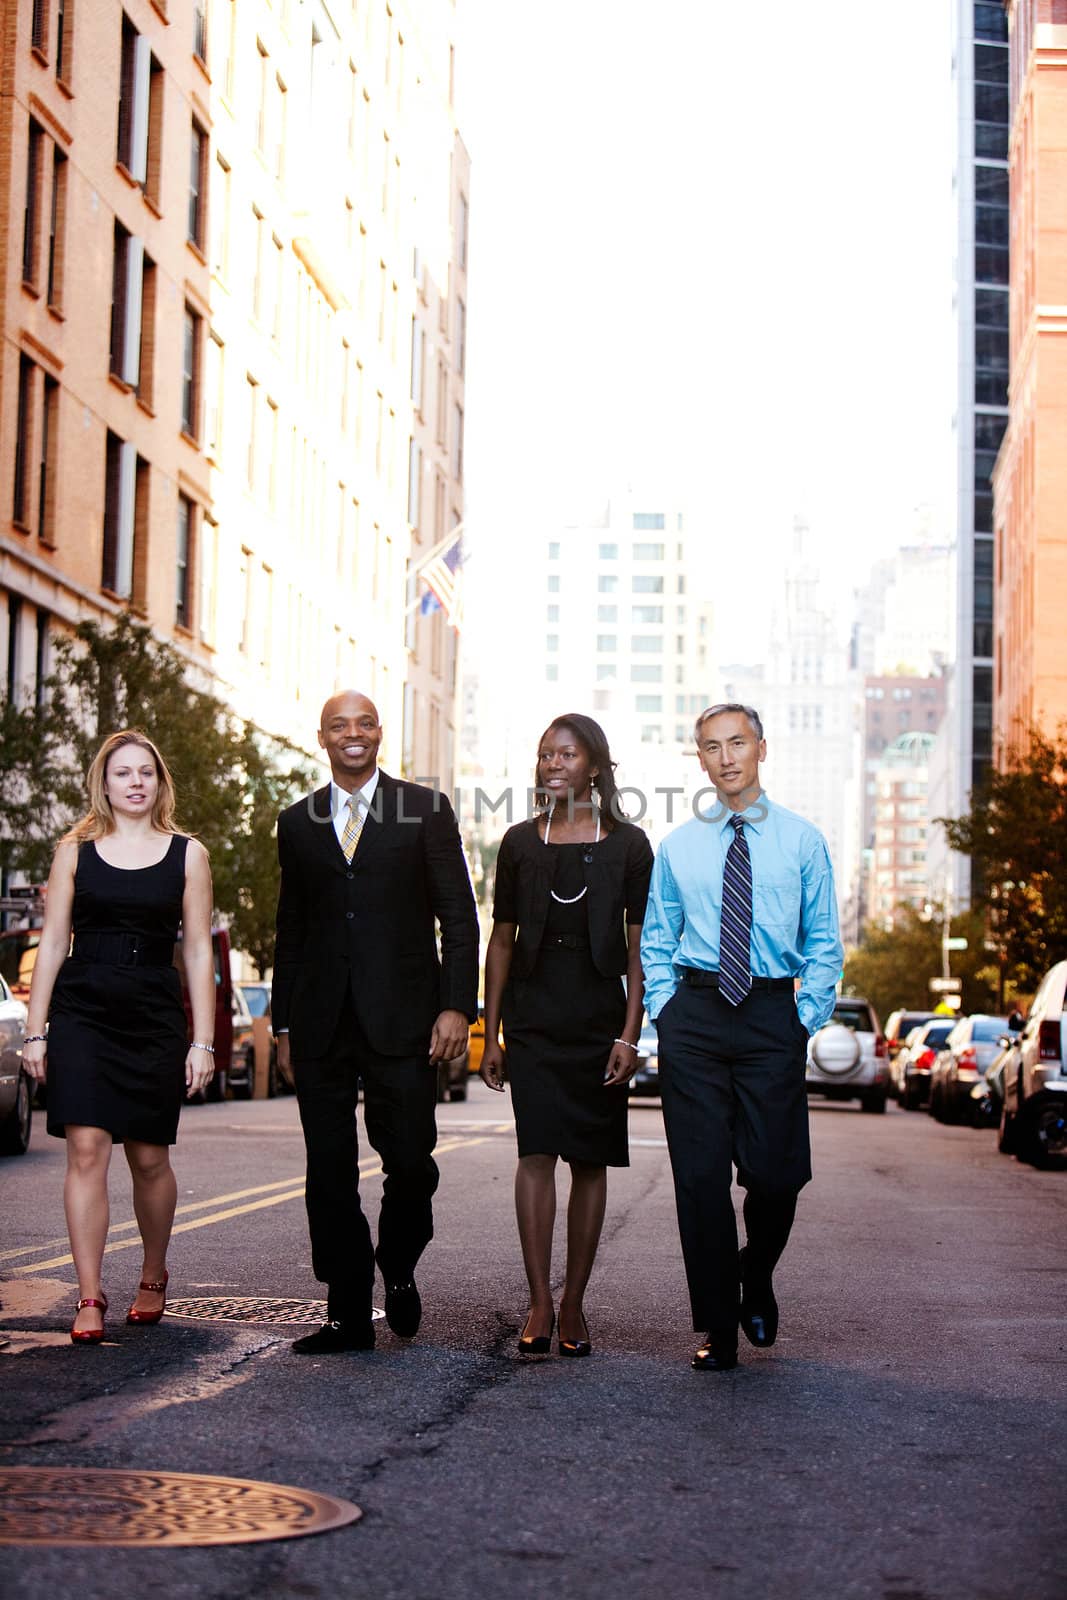 A business team outside on a street in a city